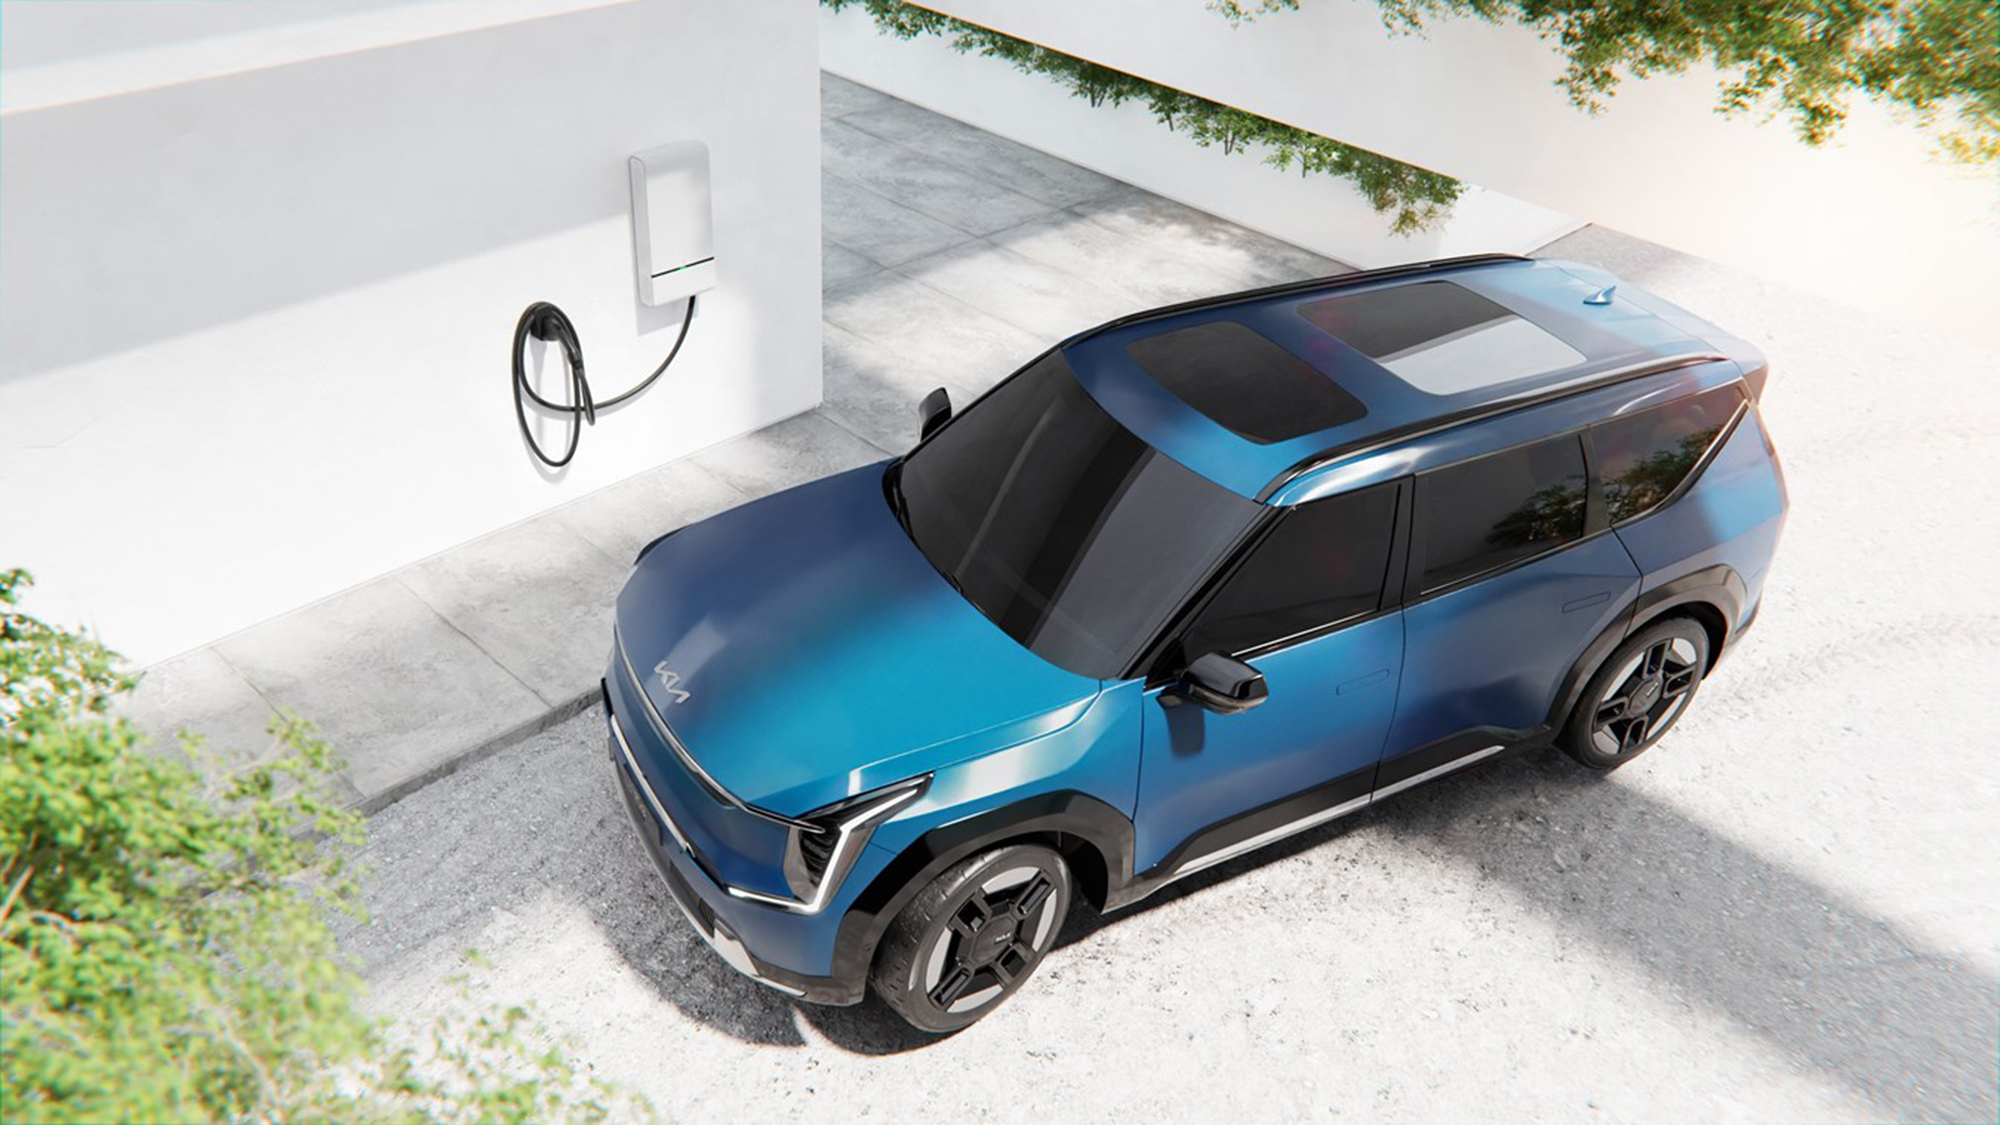 Kia's EV9 can power an average home and then some